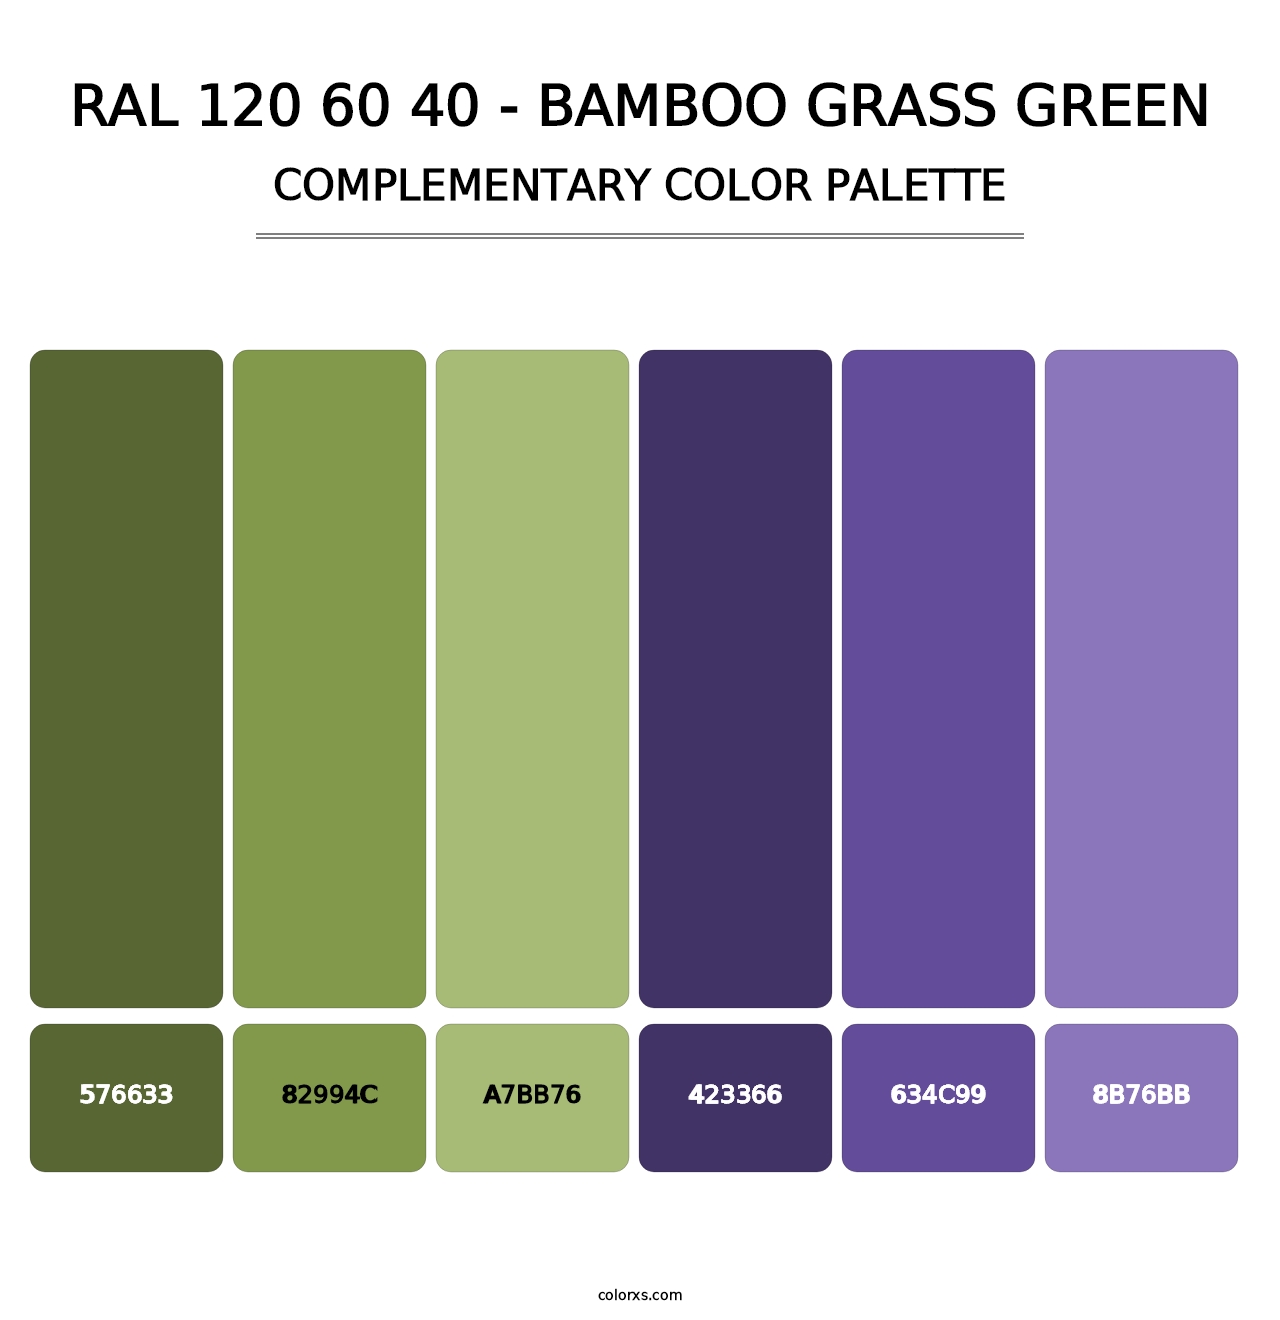 RAL 120 60 40 - Bamboo Grass Green - Complementary Color Palette